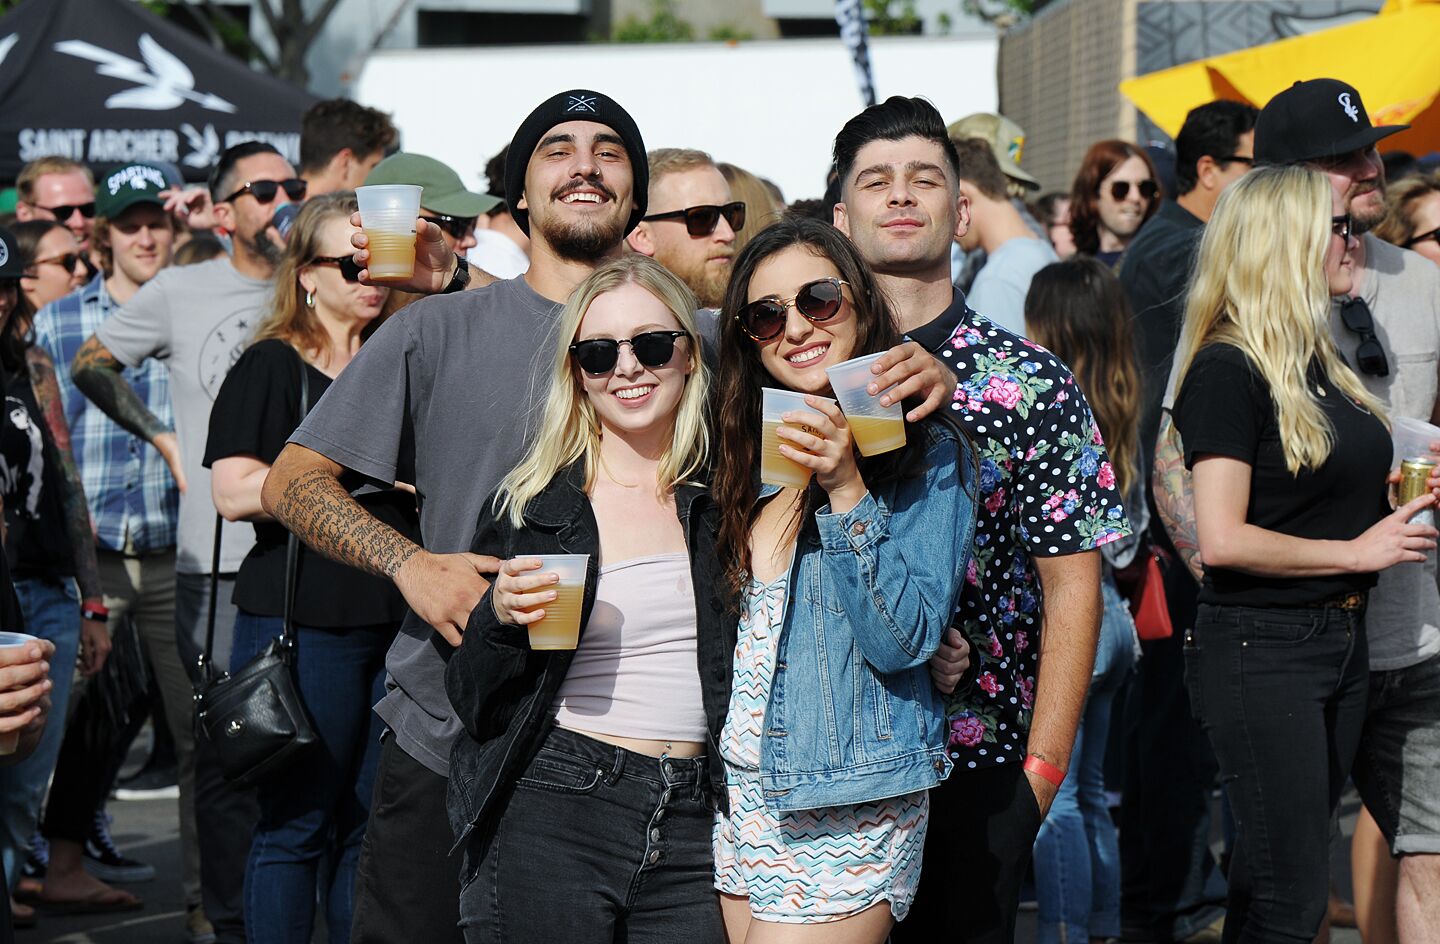 Guests at Saint Archer Brewing Co.'s sixth anniversary enjoyed live music, food trucks and the debut of the Hazy Rye with Galaxy Hops IPA specialty brew at Saint Archer Brewing Co. in Miramar on Saturday, May 18, 2019.